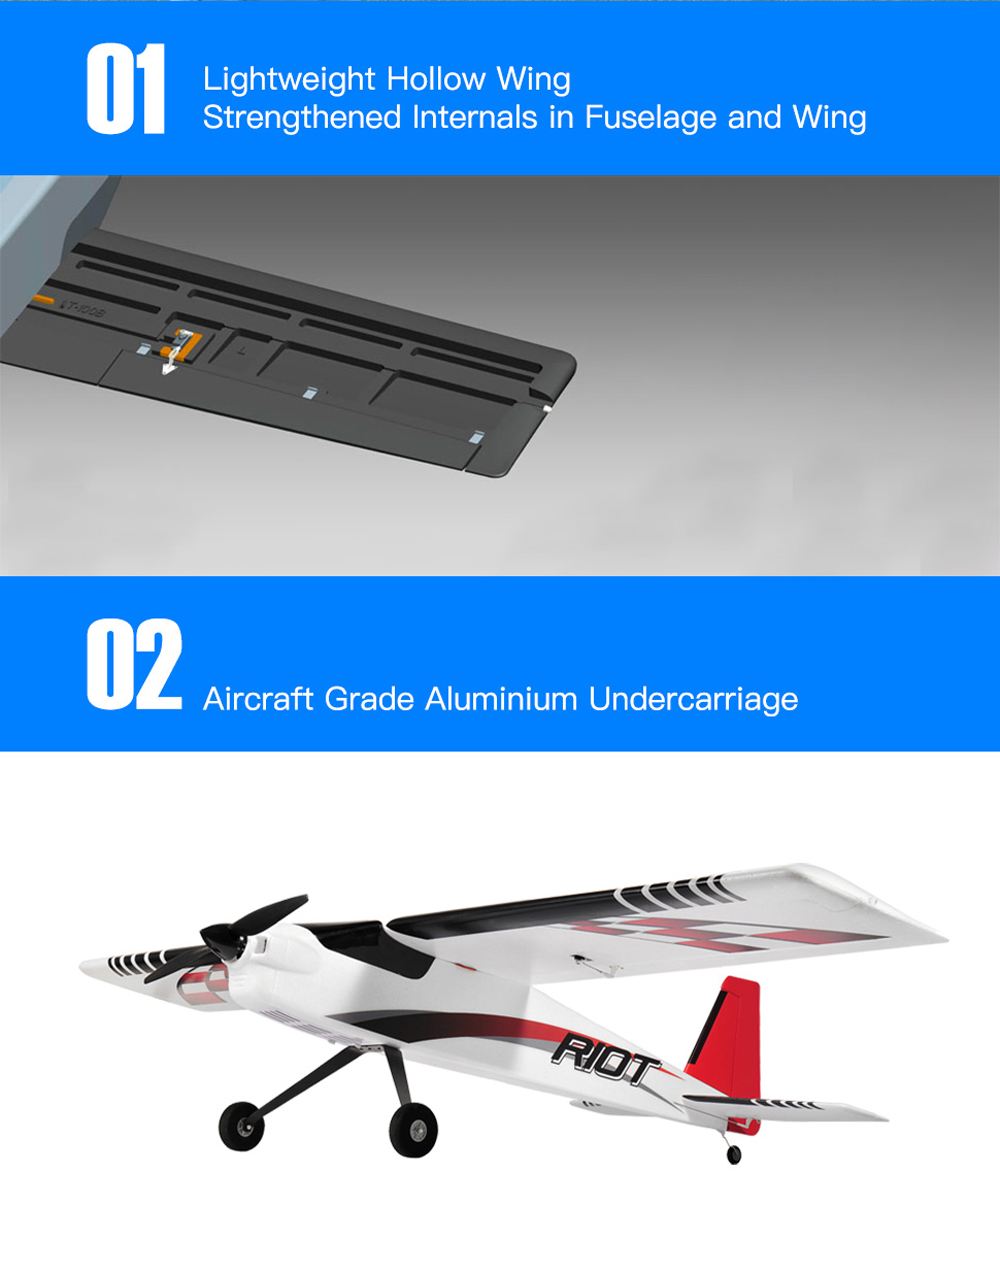 TOPRC-Hobby-RIOT-1400mm-Wingspan-EPO-Practice-Sport-Plane-RC-Airplane-PNP-for-Trainer-Beginners-1736767-5